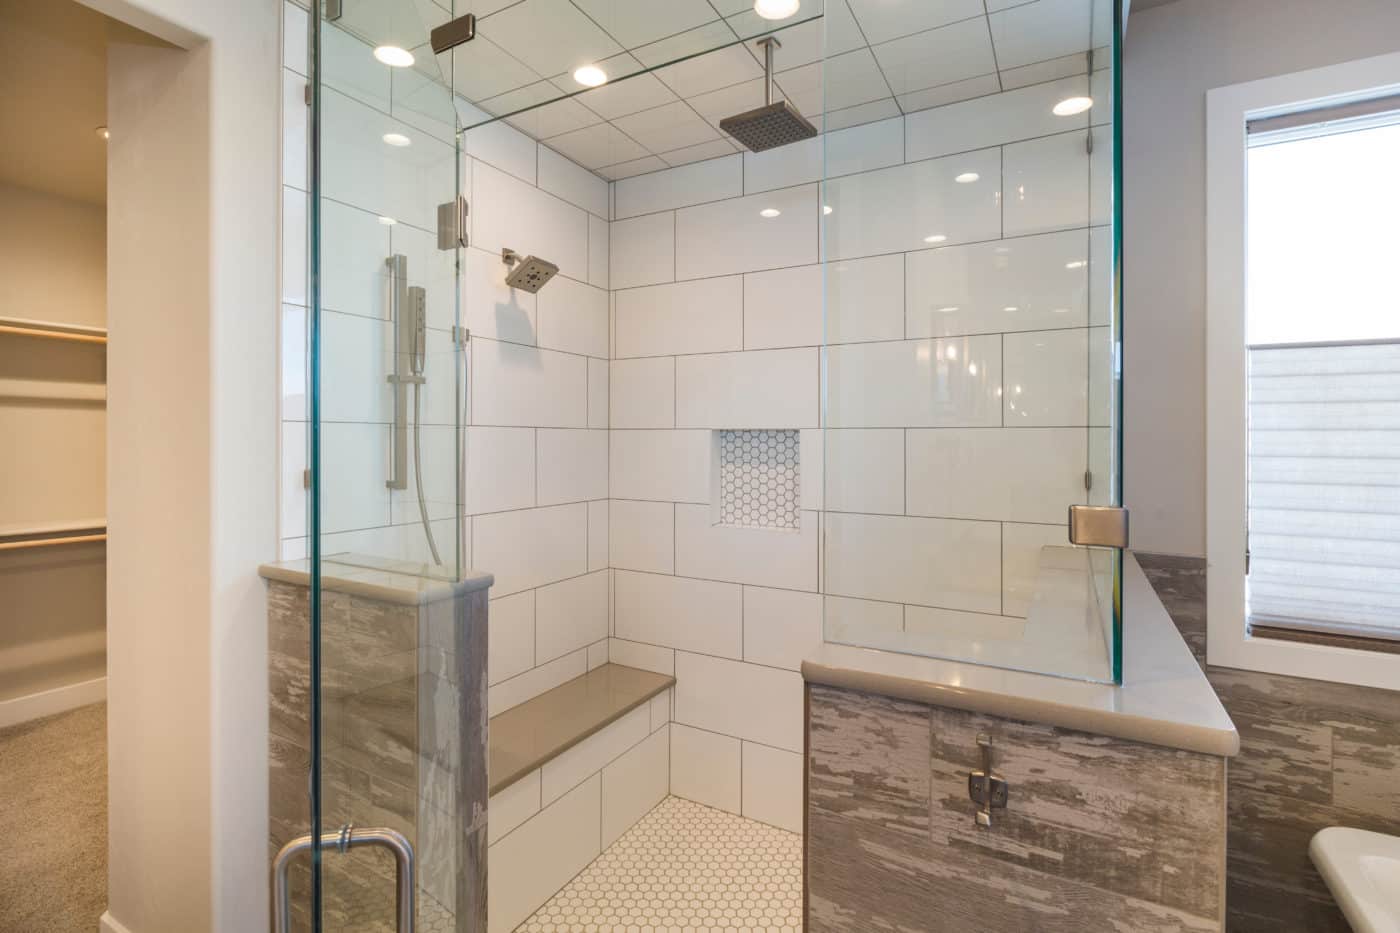 Showers and Baths by The Glass Guru, Top Rated Glass Company